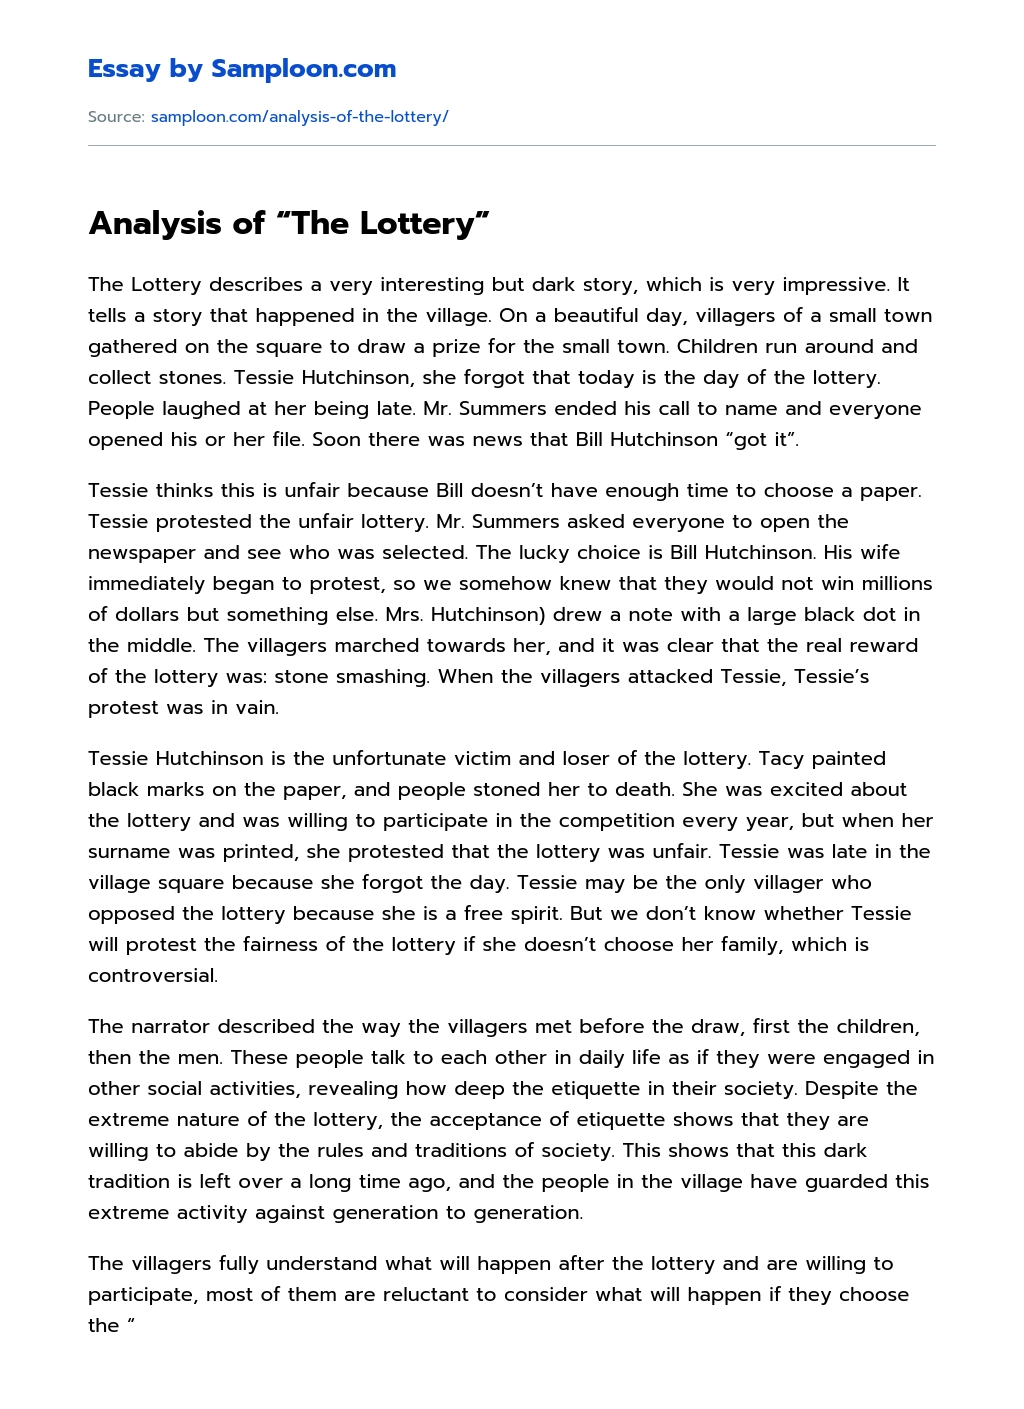 Analysis of “The Lottery” essay